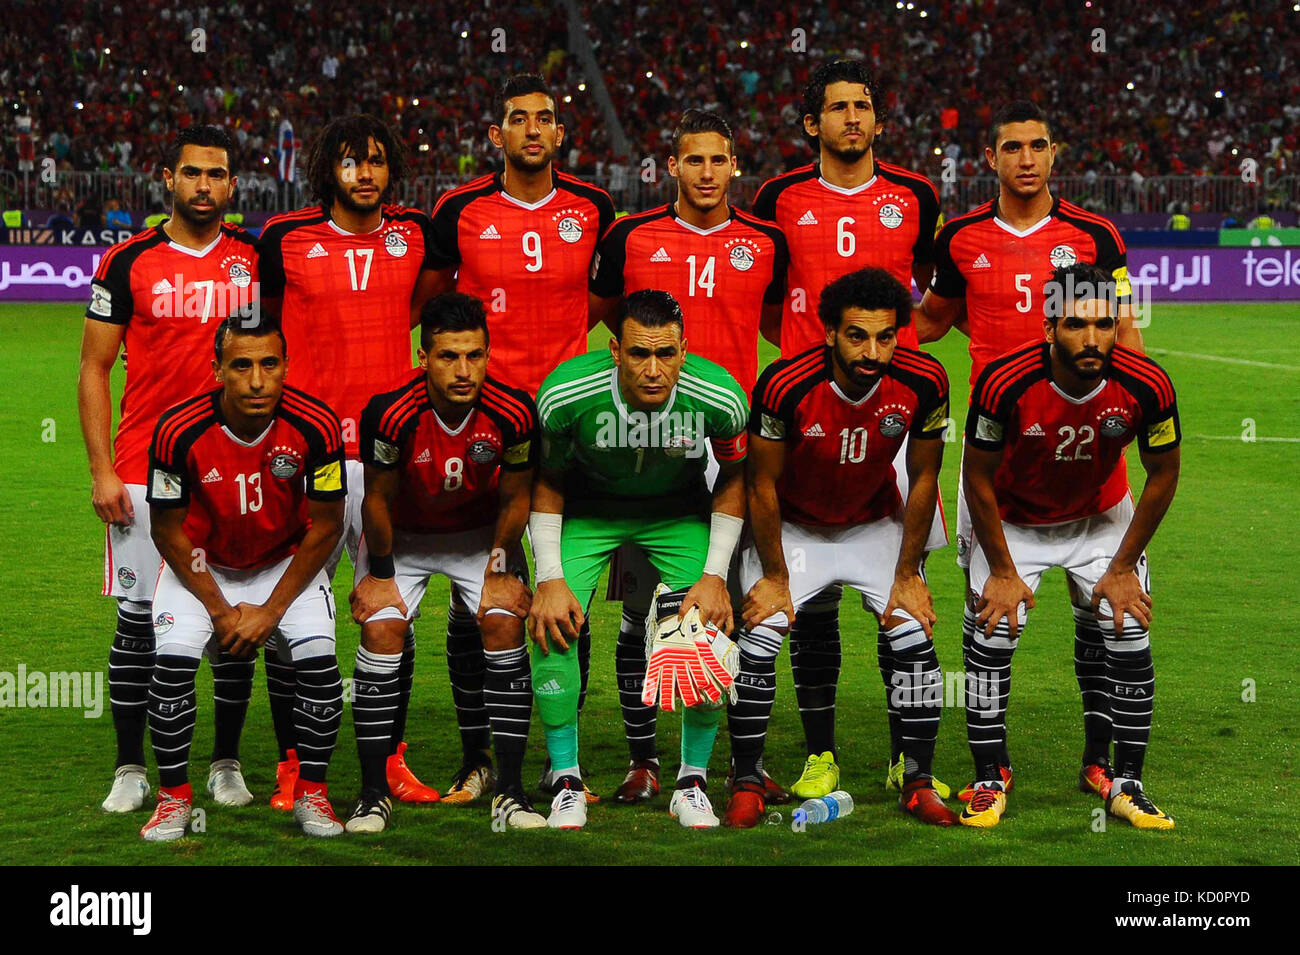 Alexandria, Alexandria, Egypt. 9th Apr, 2008. (L-R) Egypt's Mohamed Abdel-Shafy, Tarek Hamed, Essam El-Hadary, Mohamed Salah, Saleh Gomaa, Ahmed Fathy, Mohamed Elneny, Hassan Ahmed, Ramadan Sobhi, Ahmed Hegazi, Mohamed Abdel-Shafy pose for a team picture during their World Cup 2018 Africa qualifying match between Egypt and Congo at the Borg el-Arab stadium in Alexandria on October 8, 2017 Credit: Amr Sayed/APA Images/ZUMA Wire/Alamy Live News Stock Photo